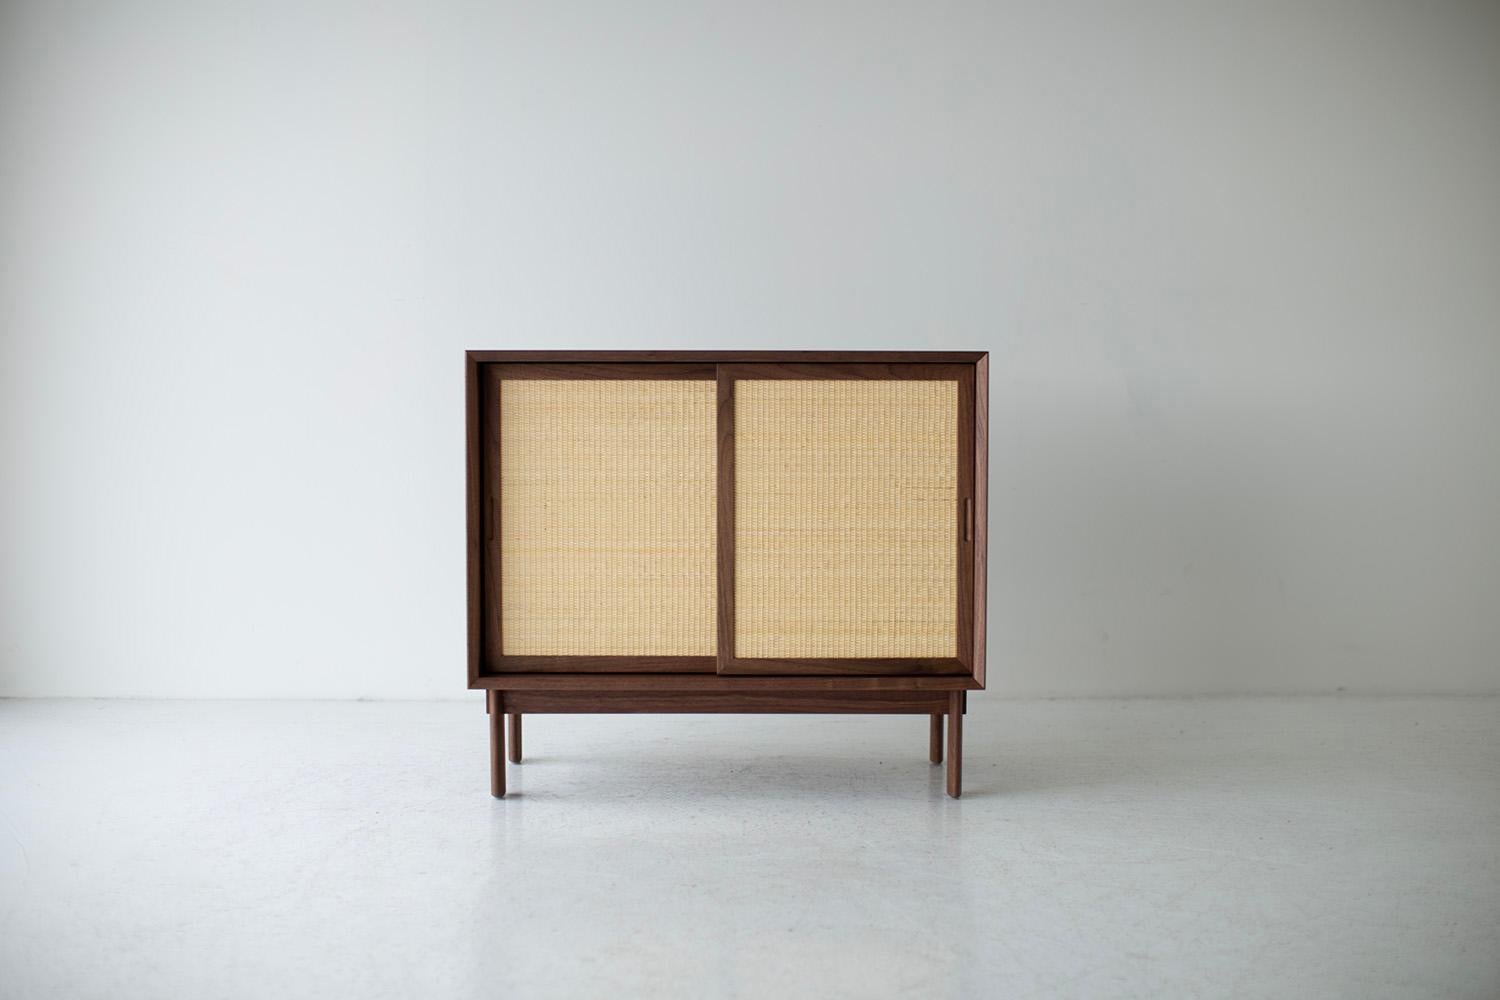 Peabody Cane Front Credenza, Modern Walnut Credenza, cane front, walnut, CraftAssociates Furniture

This Lawrence Peabody modern cane front credenza in walnut for Craft Associates Furniture is expertly hand crafted. The Peabody collection pieces